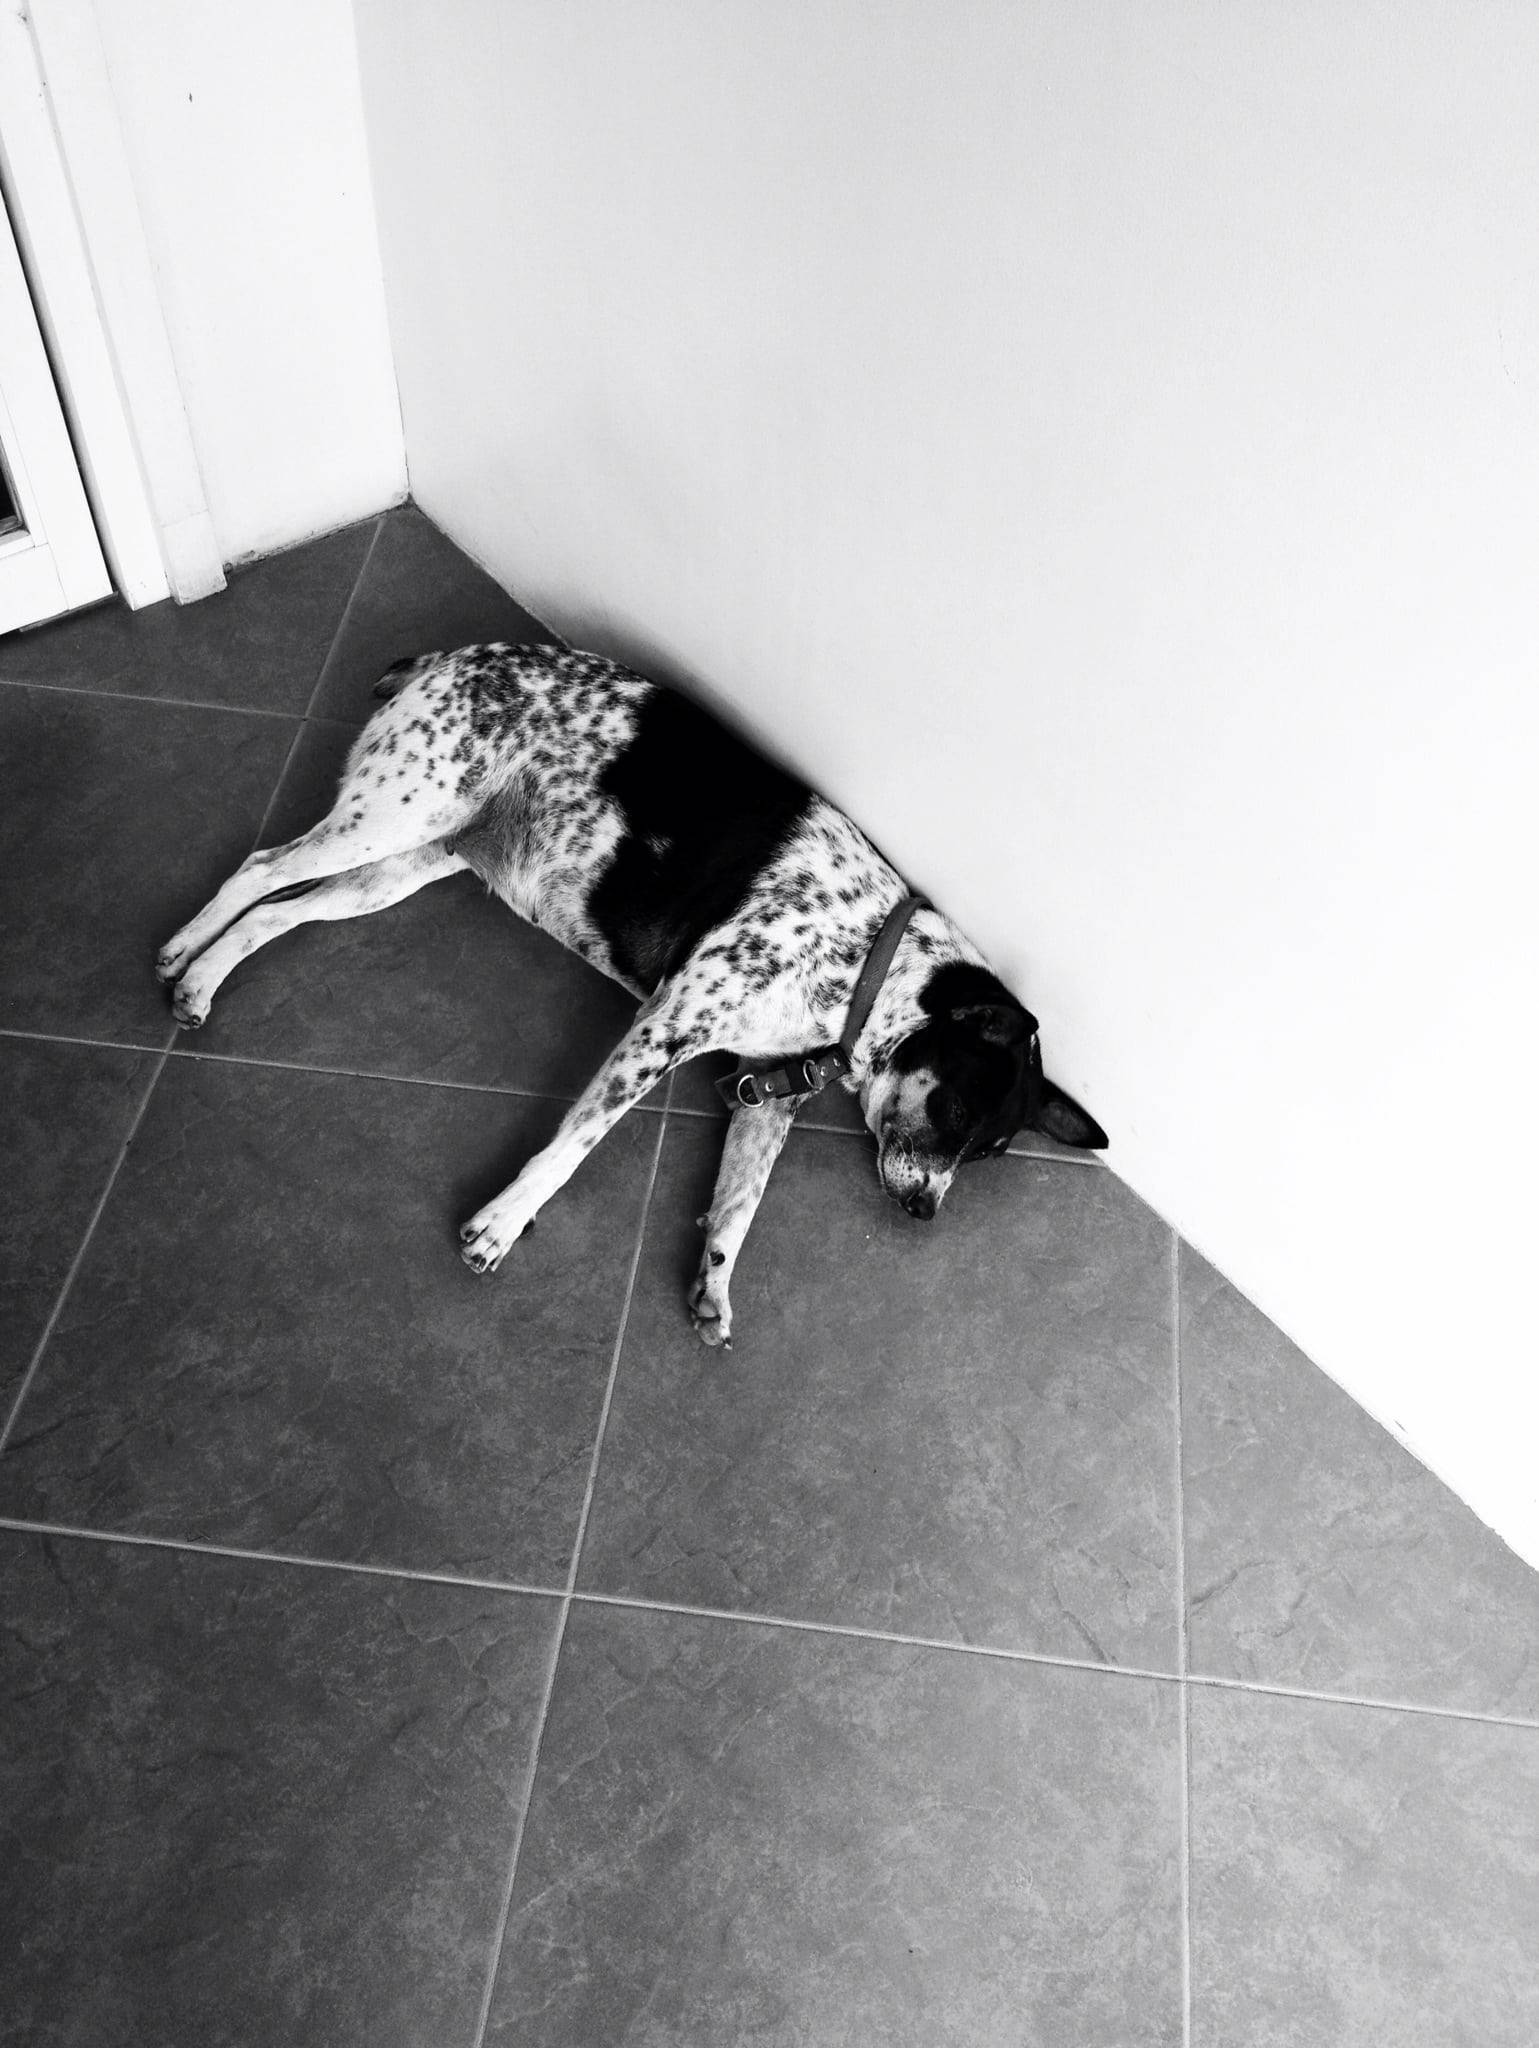 Black and white dog sleeping on a tile floor.